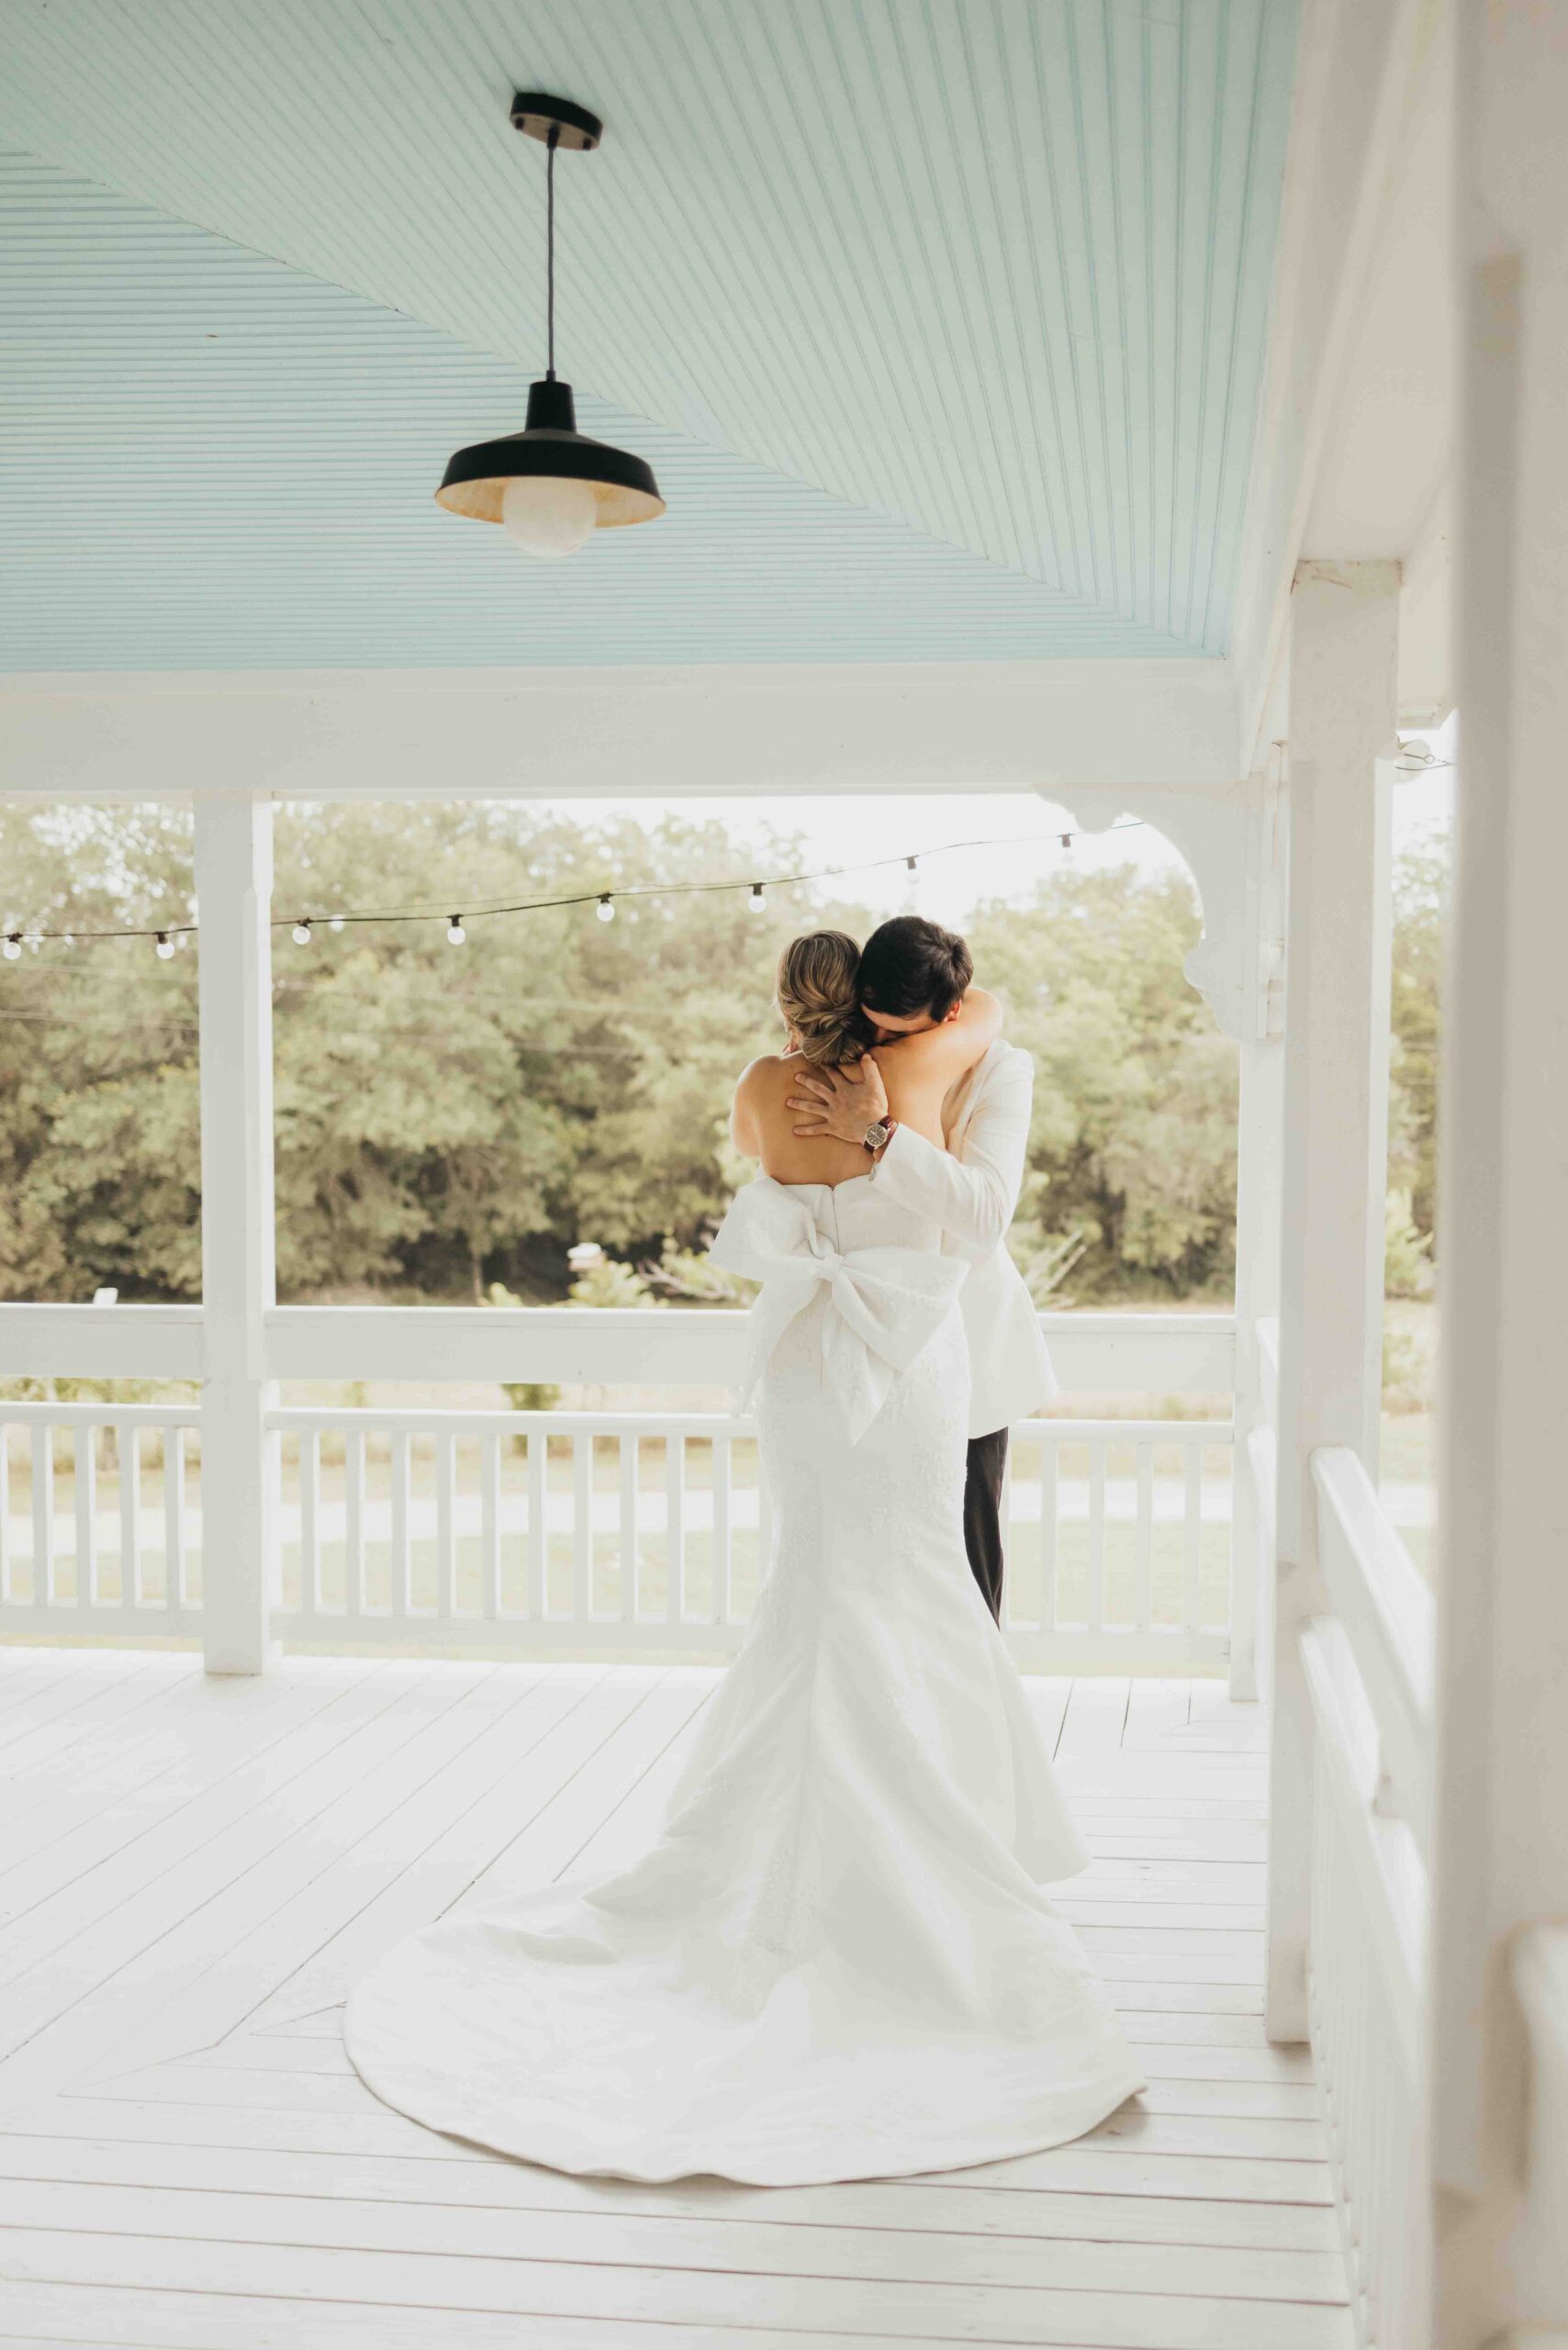 Pop Up Weddings in Houston, becoming increasingly popular. Bride hugs her groom on a patio in Roundtop Texas, after doing a first look before their ceremony.